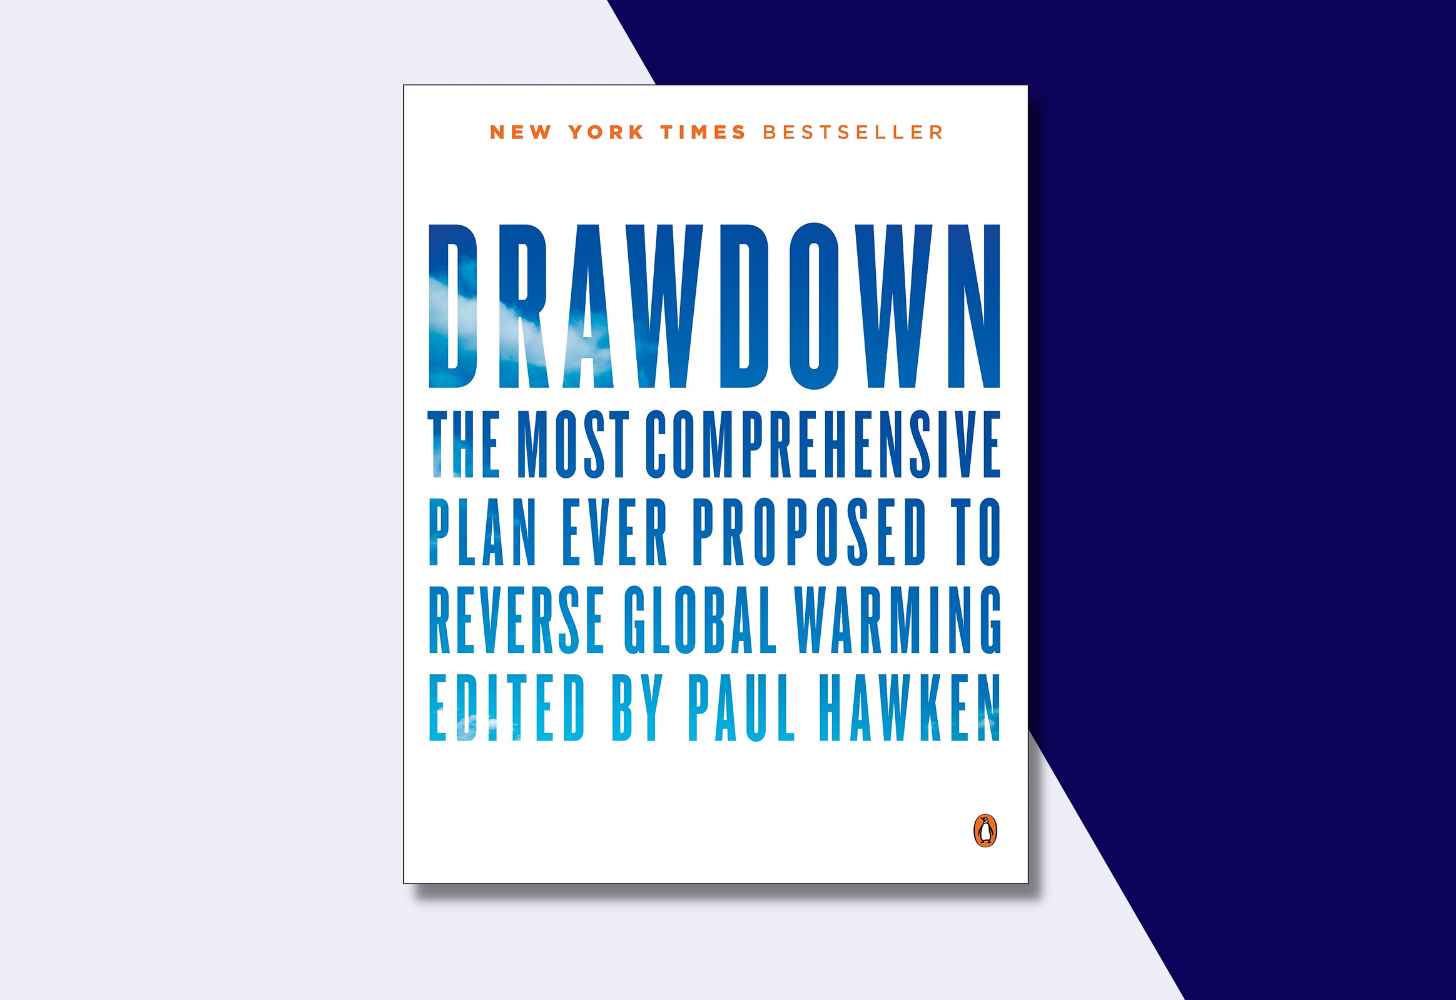 The Cover Of “Drawdown: The Most Comprehensive Plan Ever Proposed to Reverse Global Warming” by Paul Hawken